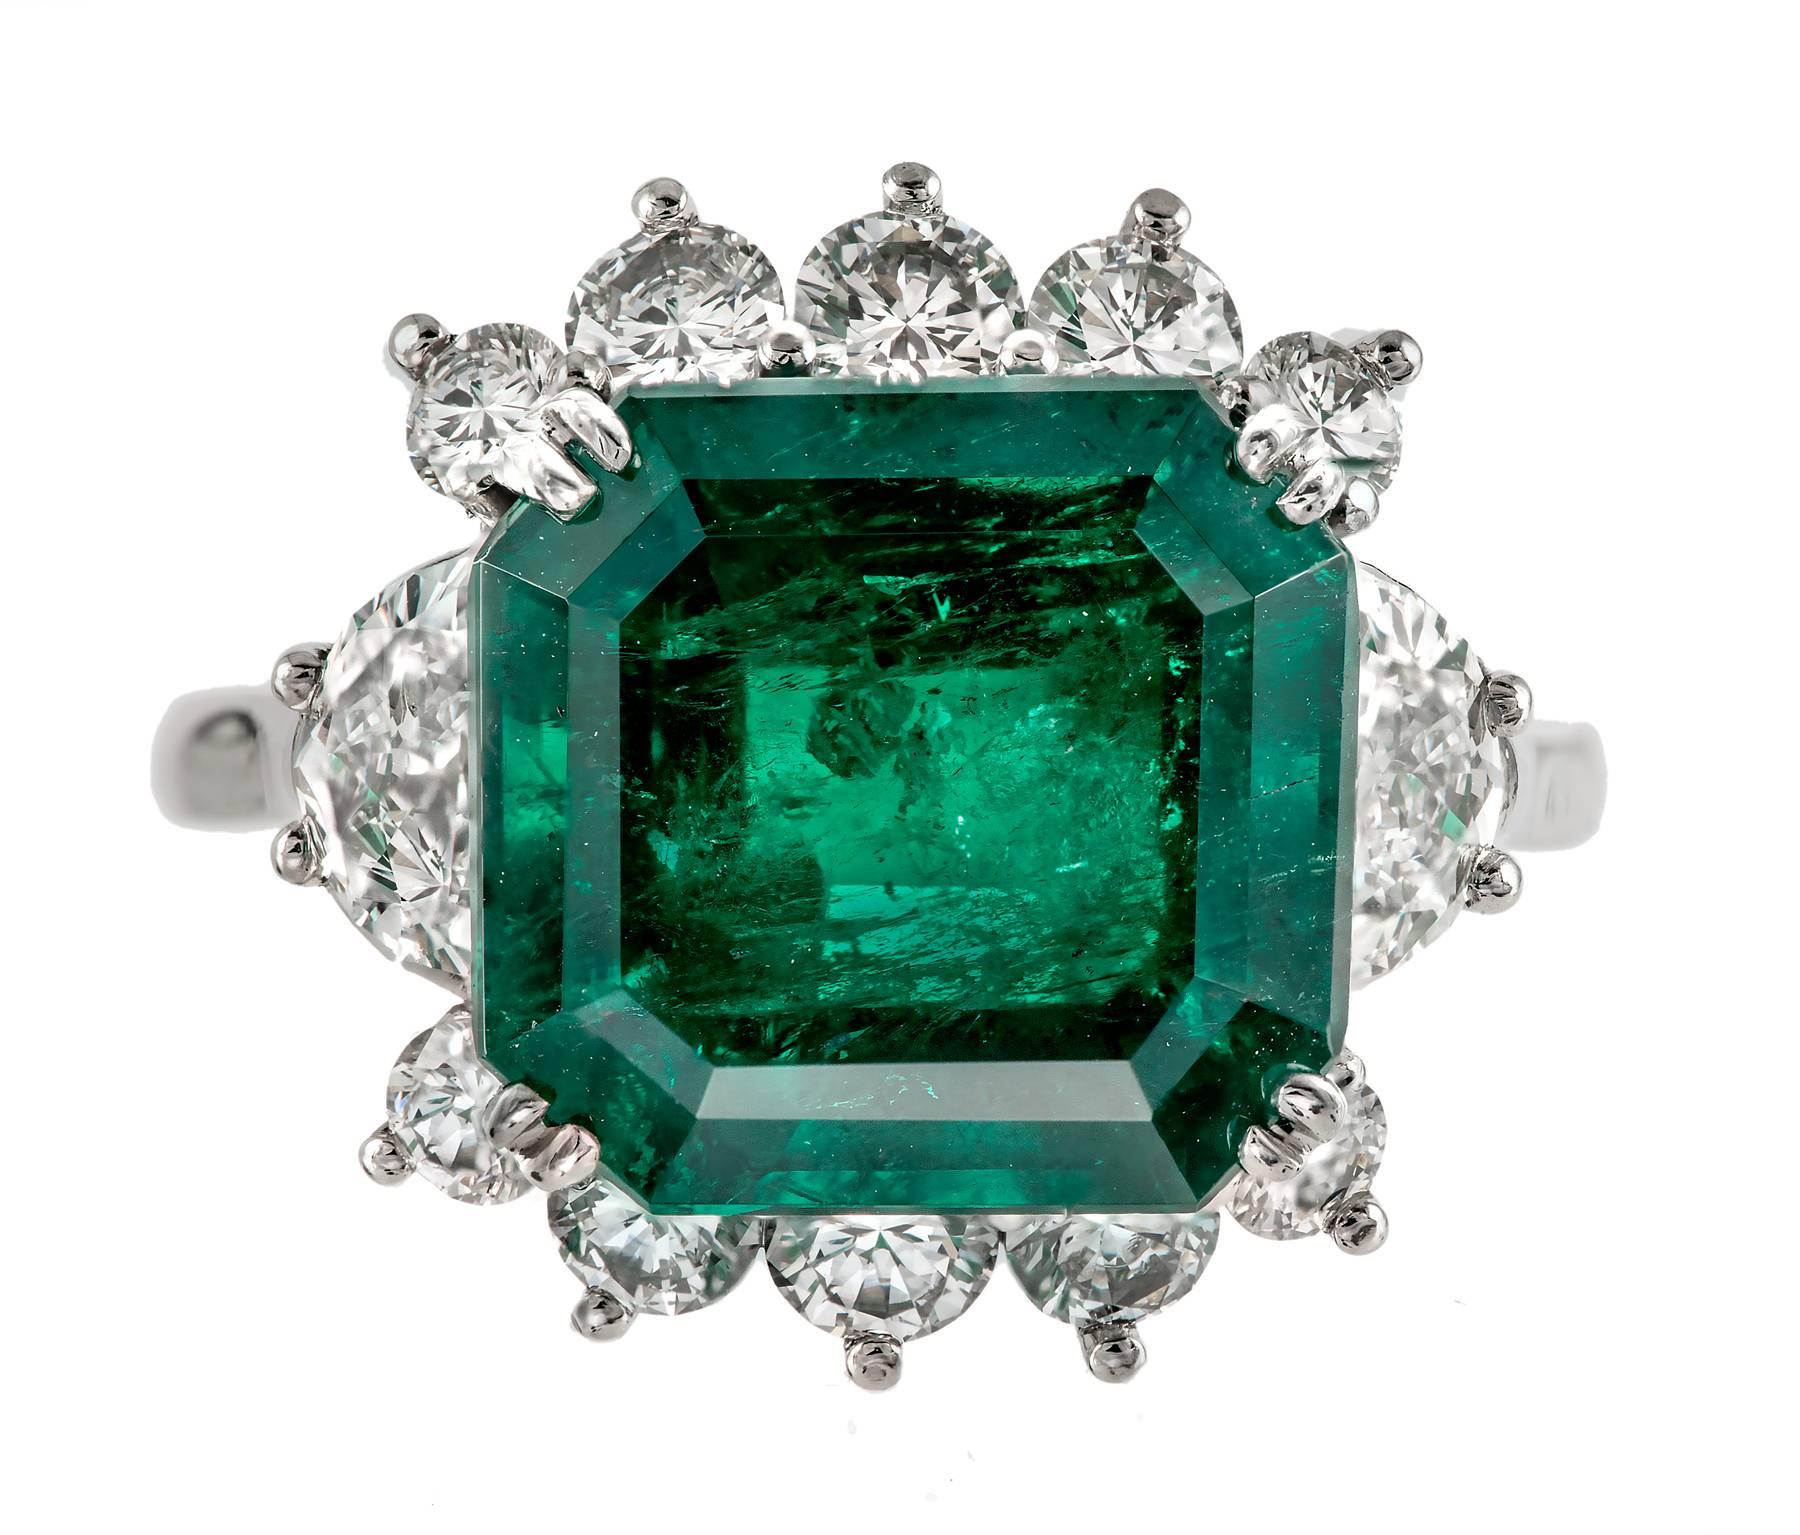 Fine deep green Colombian Emerald in a handmade platinum engagement ring with fine half-moon diamonds. Unusual and bright square eight sided step cut. GIA and AGL certified. Moderate clarity enhancement F2. Moderate natural inclusions. 

One emerald